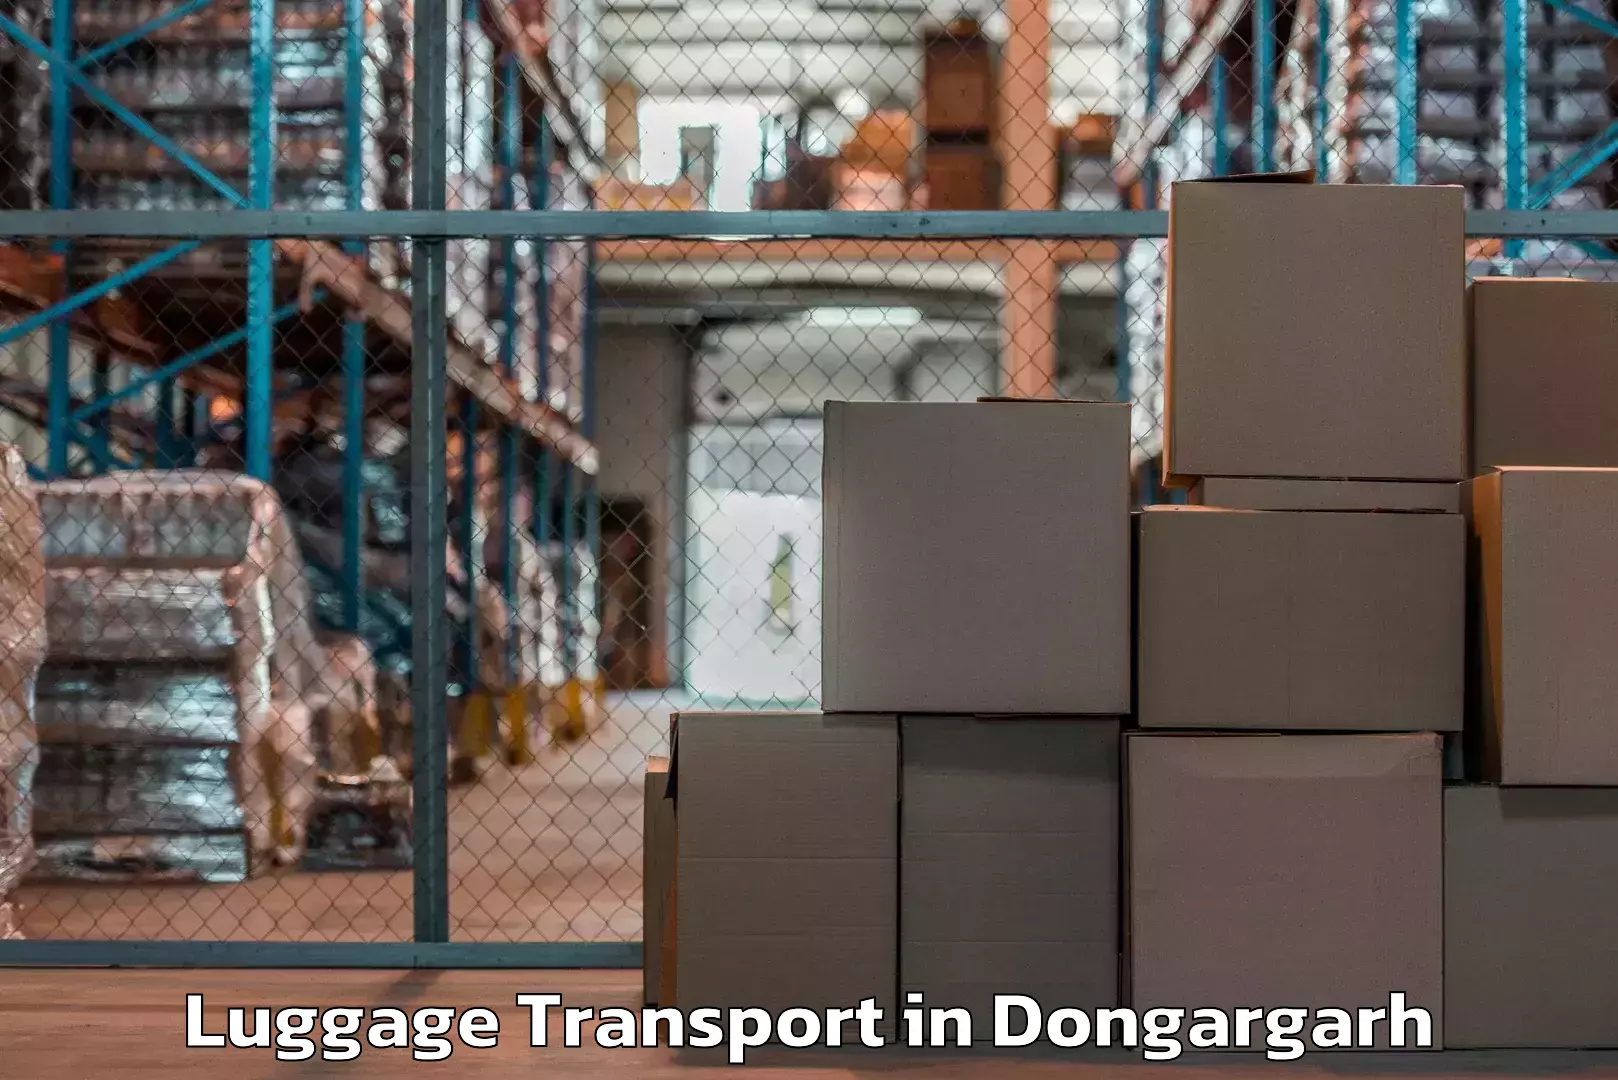 Automated luggage transport in Dongargarh